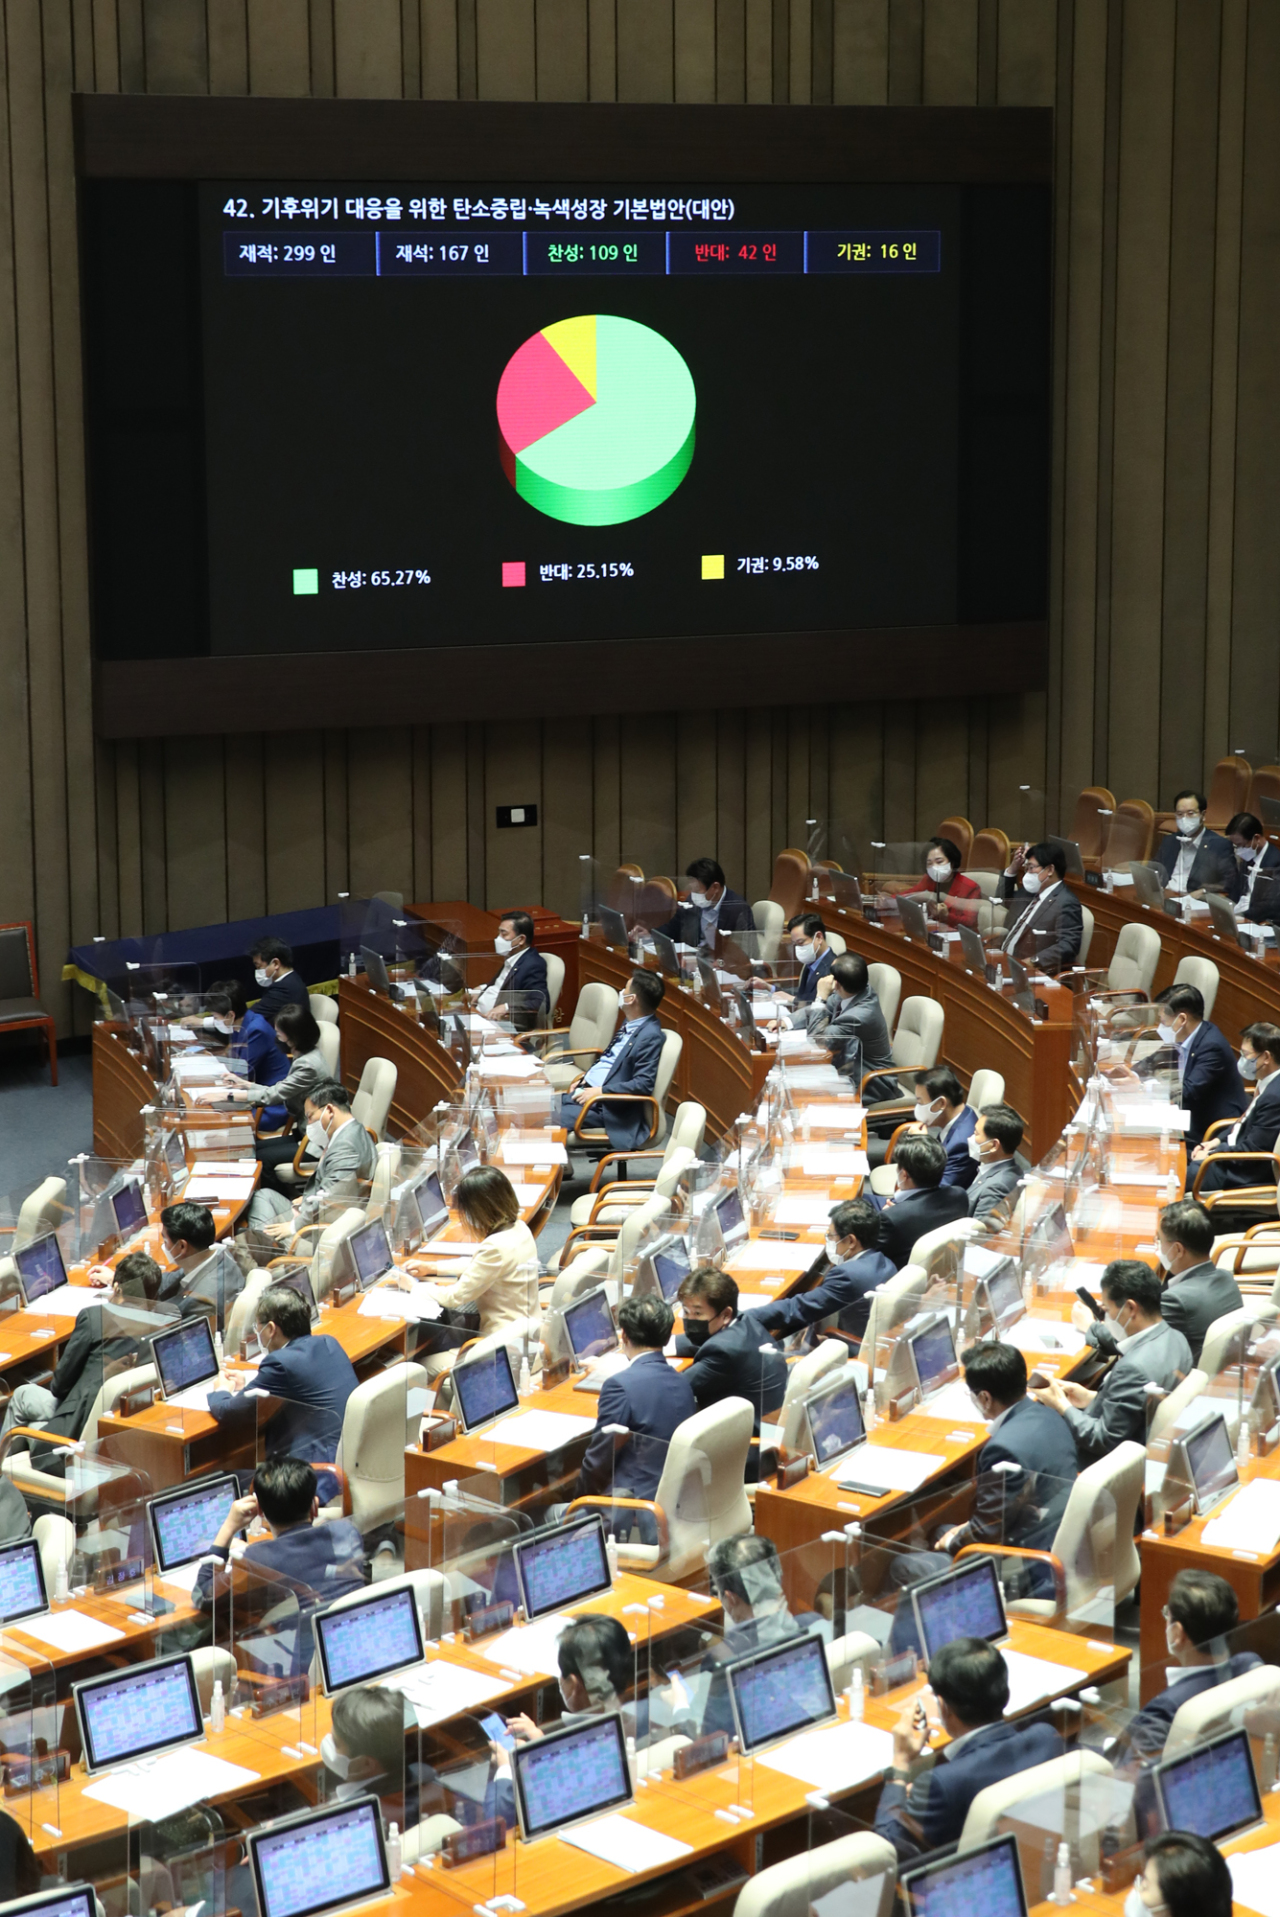 The carbon neutrality act is passed during the National Assembly’s plenary session on Tuesday. (Yonhap)